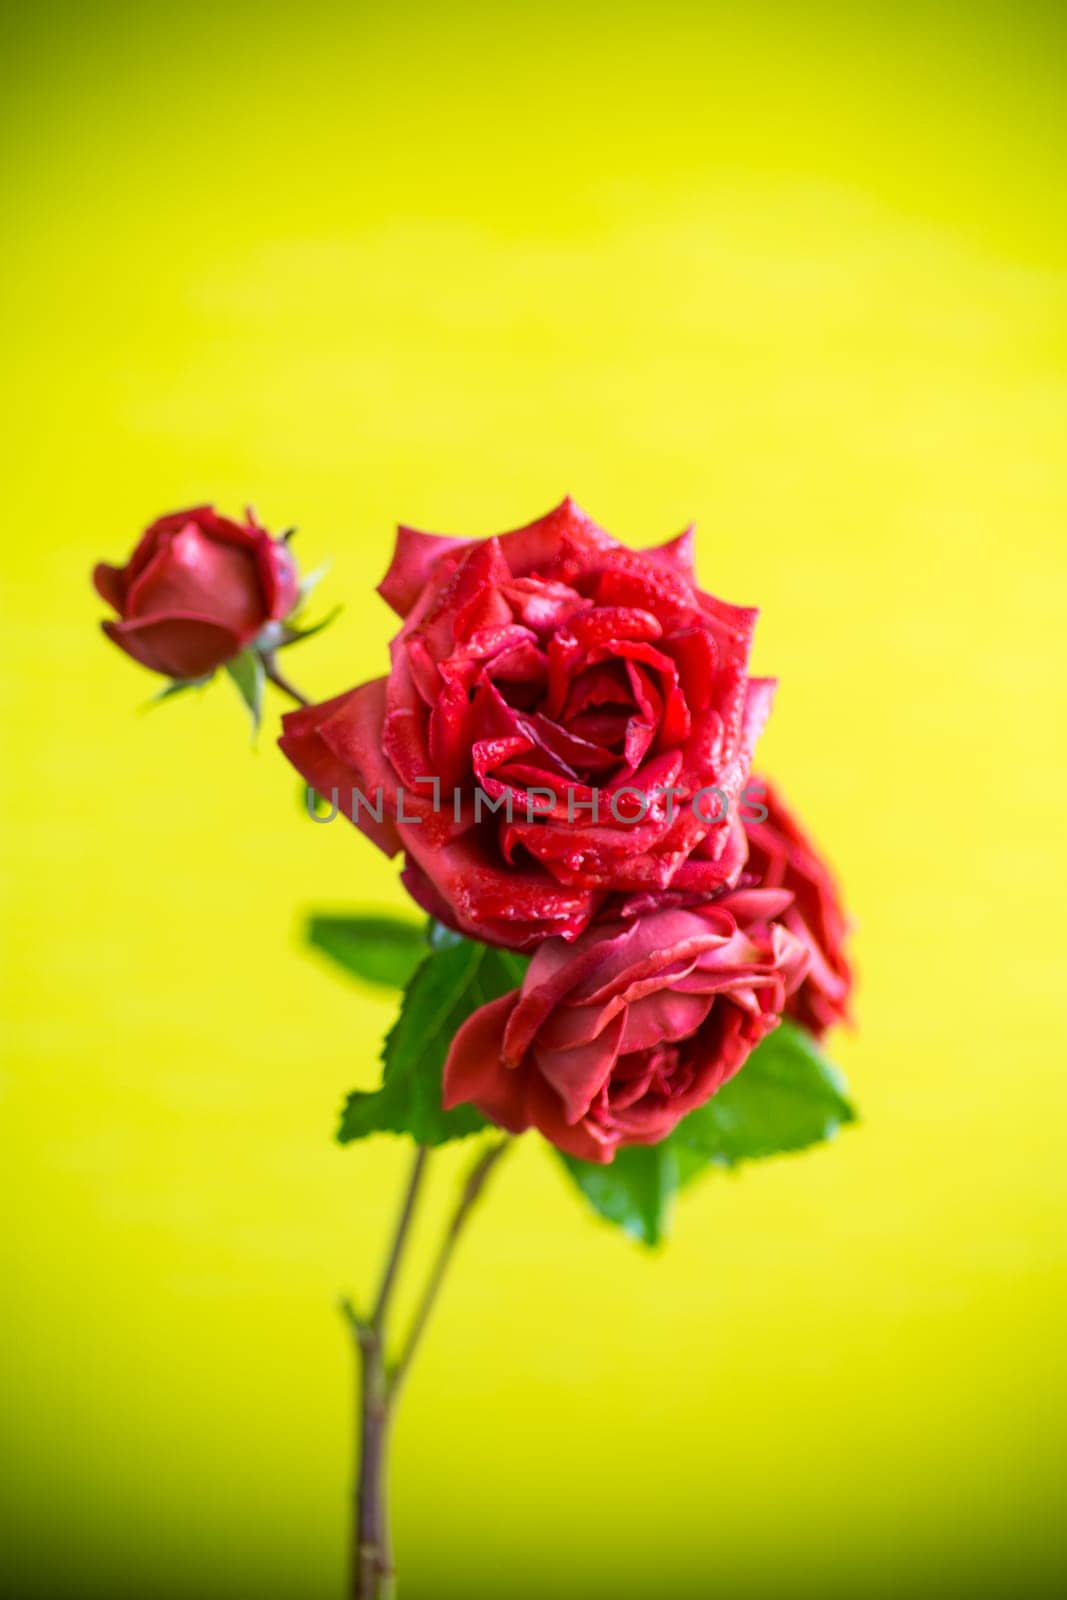 Flowers of beautiful blooming red rose isolated on green background.